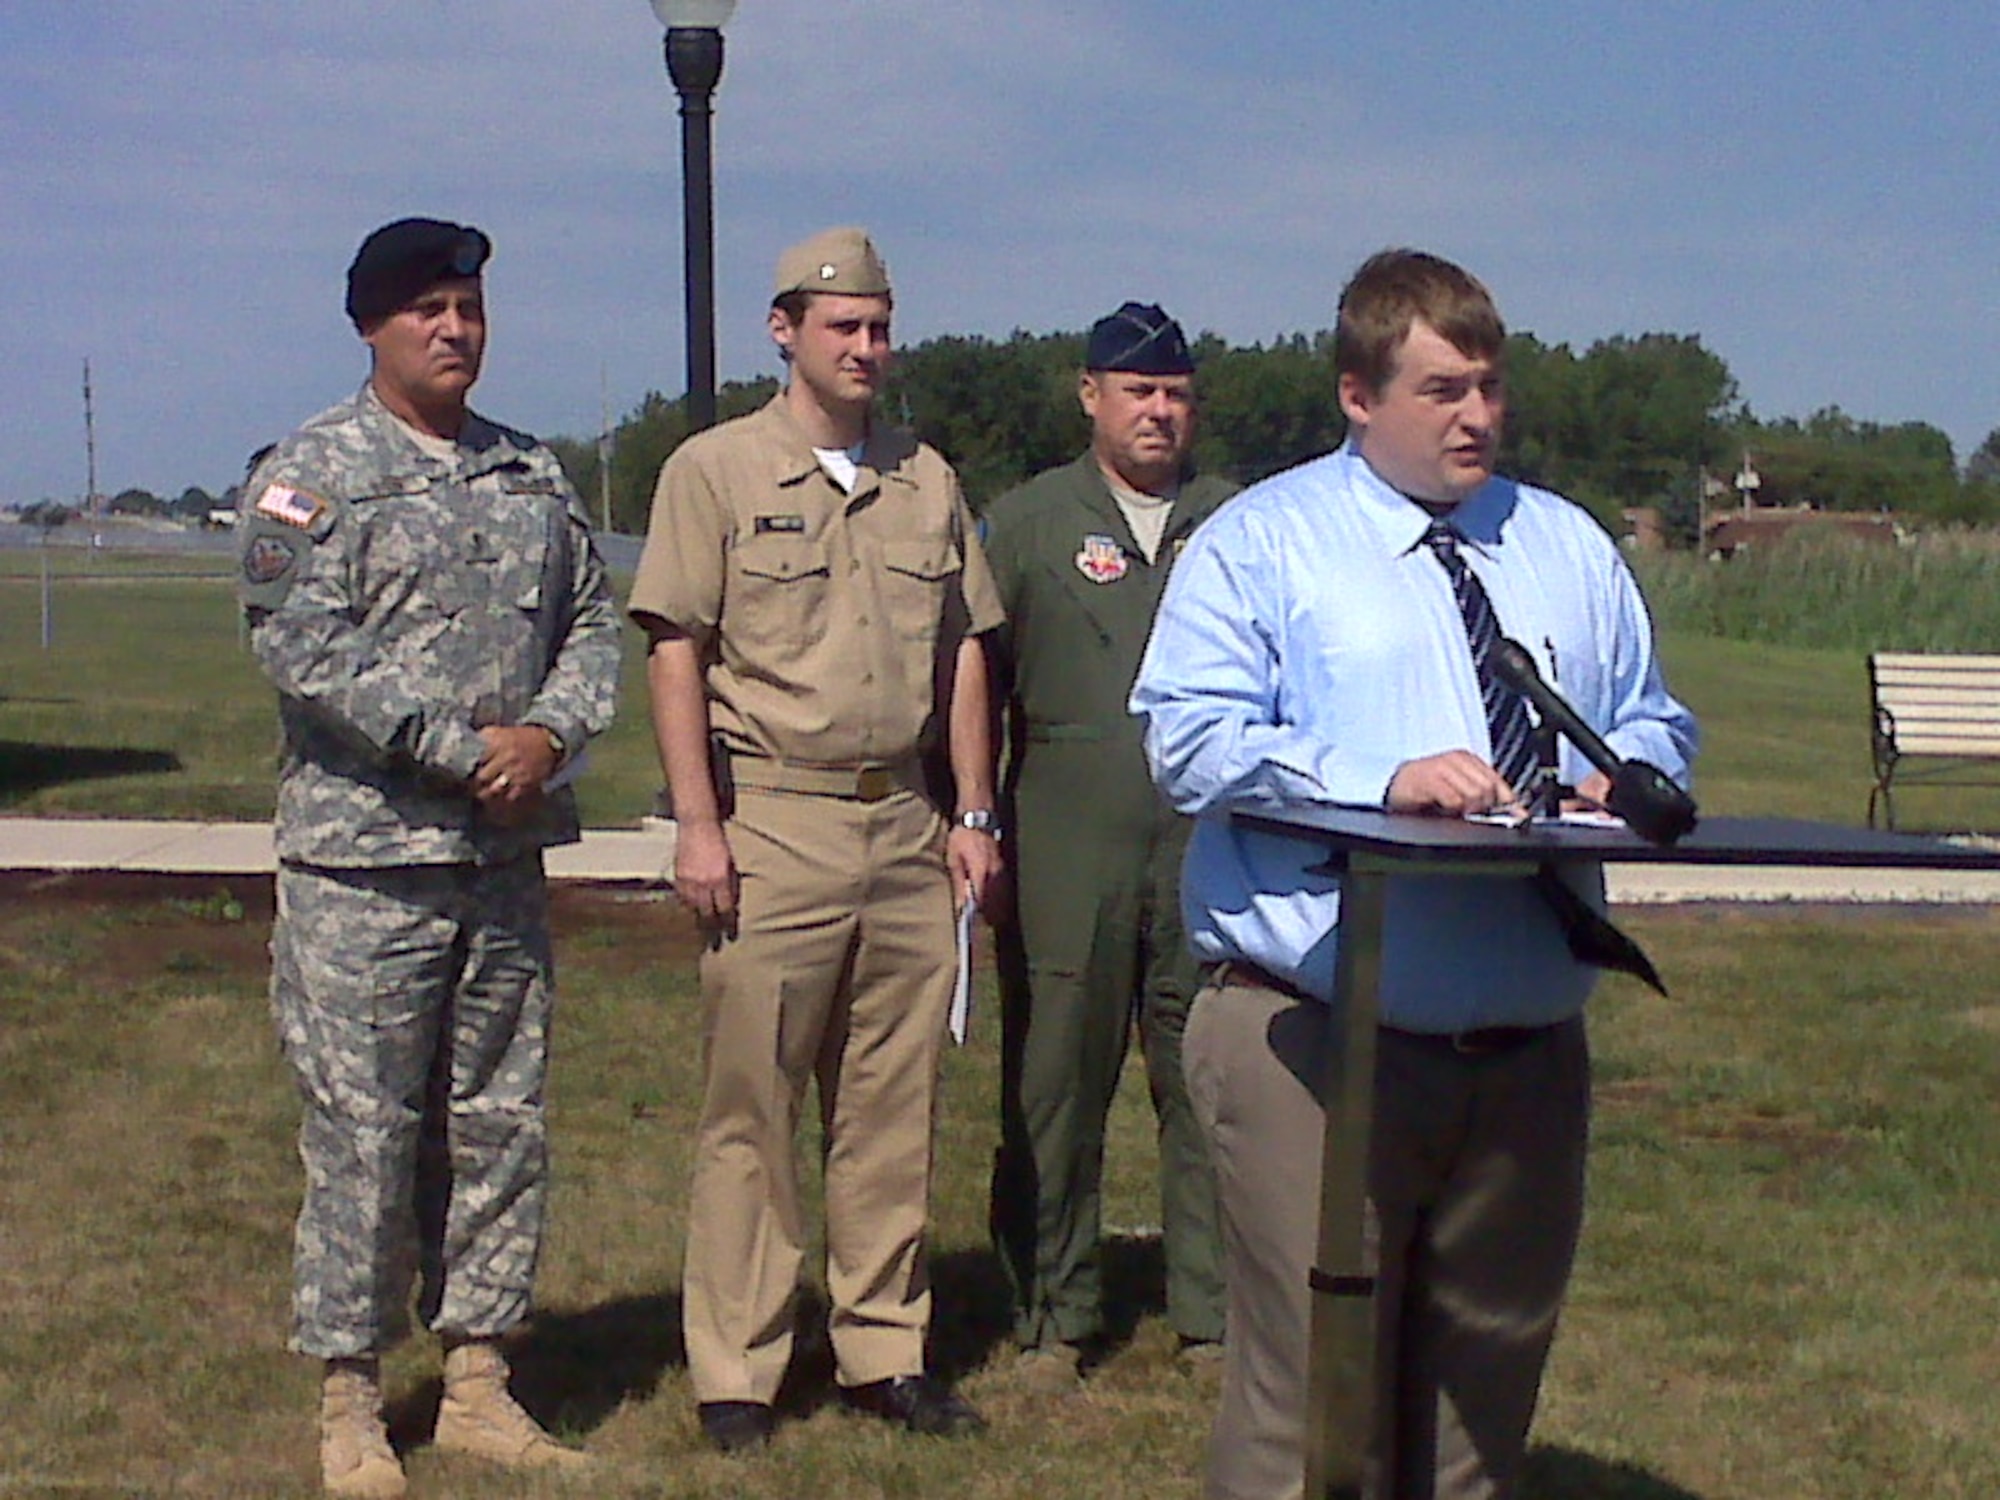 Mr. John Ambrose, epidemiologist with the U.S. Army Public Health Command, addresses media at a subject matter expert availability on Saturday, Aug. 7, at Selfridge Air National Guard Base.  Also shown behind Ambrose are (left to right) Maj. Gen. Kurt Stein, commanding general of TACOM, Lt. Commander (Dr.) Lee Hampton, epdemic intelligence officer with the Centers for Disease Control and Prevention, and Brig. Gen. Michael L. Peplinski, 127th Wing commander and Selfridge Base Commander.  Ambrose and Dr. Hampton discussed the legionnaire's outbreak at Selfridge and provided detailed information regarding the ongoing investigation.